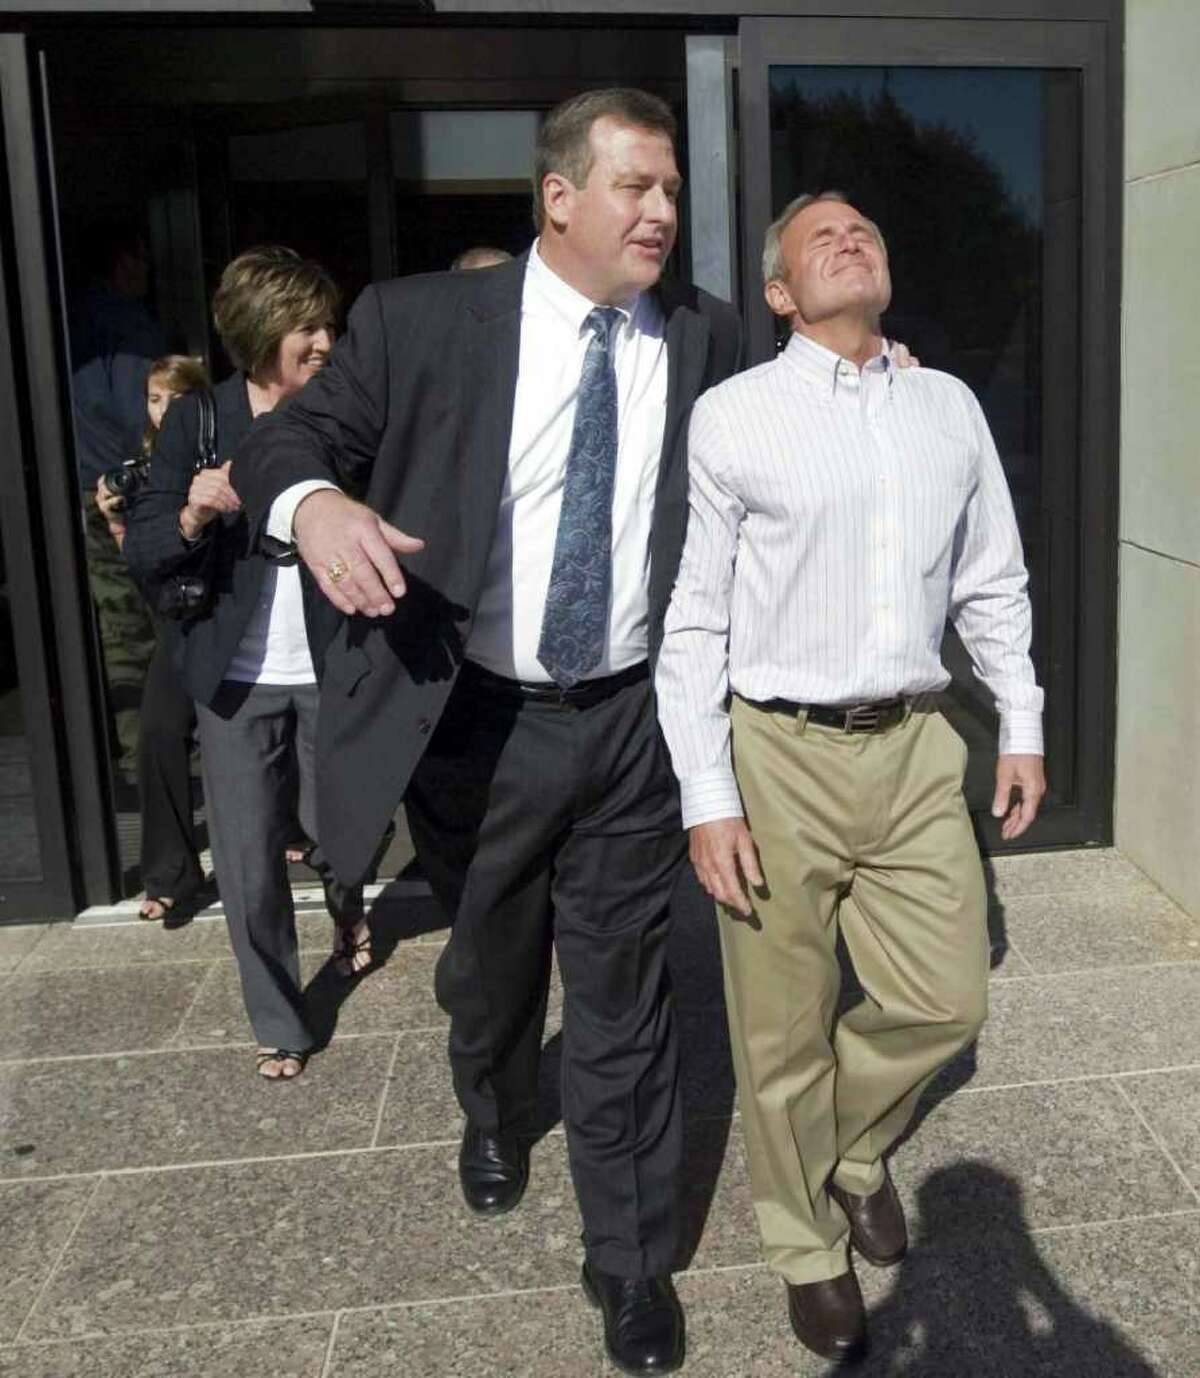 File - In this Oct. 4, 2011 file photo Michael Morton, right, leaves the Williamson County Justice Center in Georgetown, Texas, with lawyer John W. Raley, Jr. after a judge freed him. Morton, who spent nearly 25 years in prison in his wife's beating death, walked free Tuesday after DNA tests showed another man was responsible. The Innocence Project has accused the case’s original prosecutors of deliberately concealing evidence that likely would have helped Morton avoid being convicted in the first place. The district attorney who tried the original case, Ken Anderson, is now a district judge in Williamson County. (AP Photo/Austin American-Statesman, Ricardo B. Brazziell, File) MAGS OUT; NO SALES; TV OUT; INTERNET OUT; AP MEMBERS ONLY